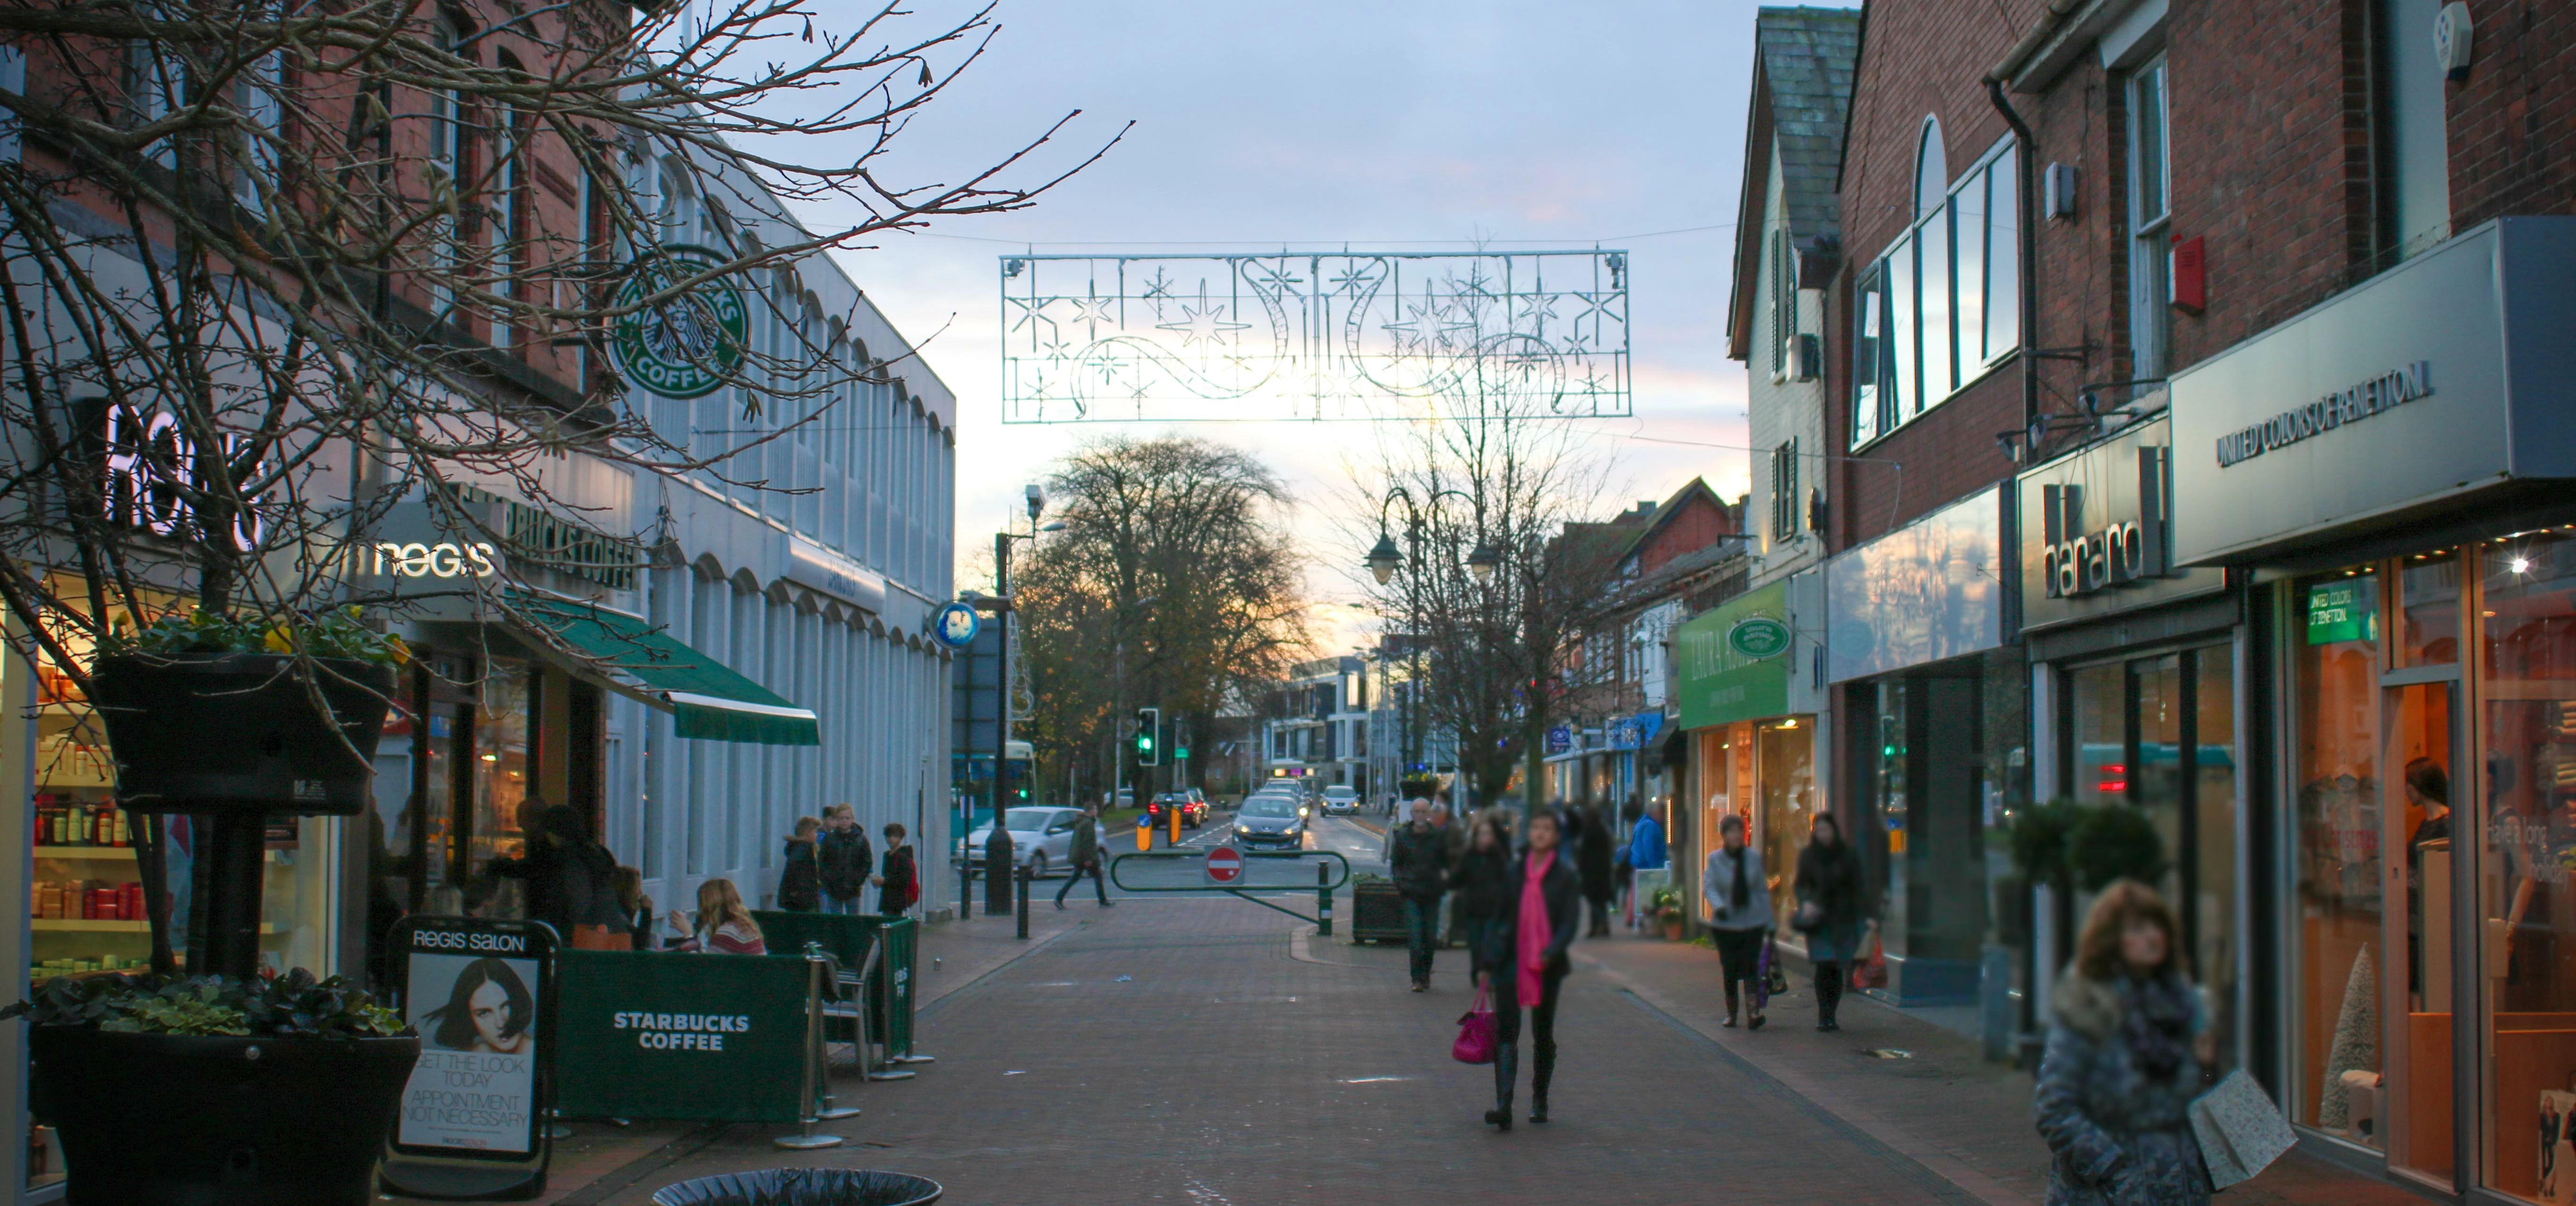 Wilmslow Town Centre, Cheshire